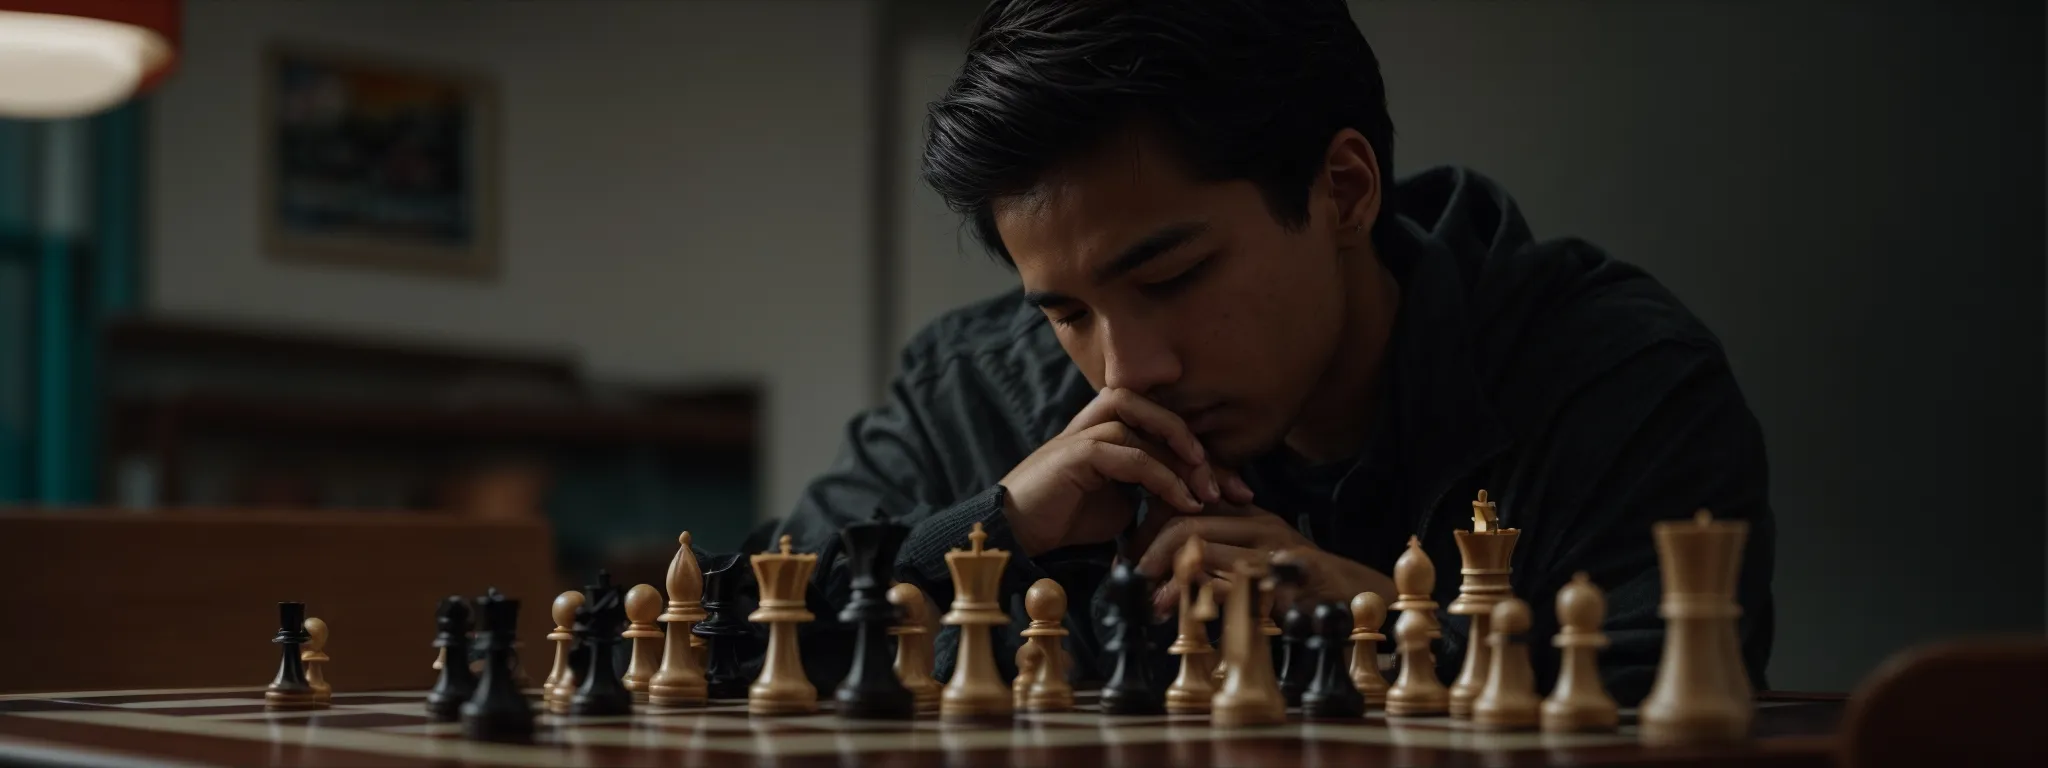 a chess player poised over a game, contemplating a strategic move.